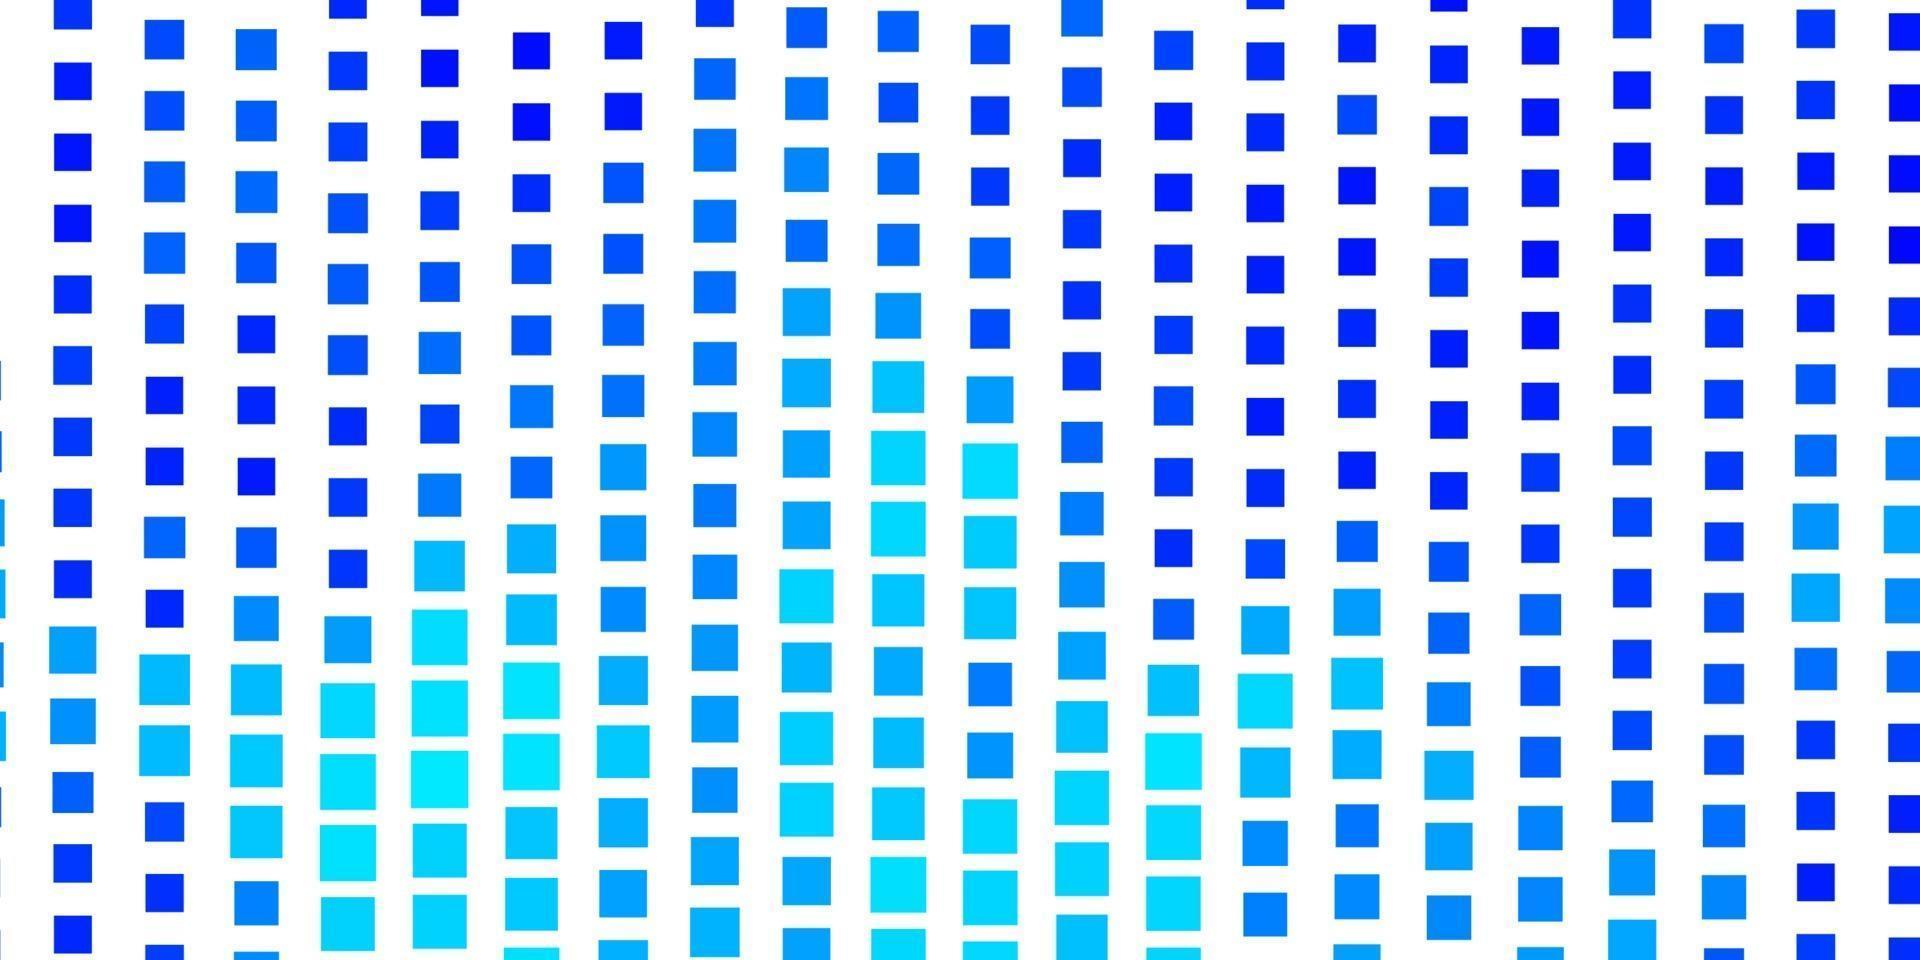 Light BLUE vector layout with lines, rectangles.